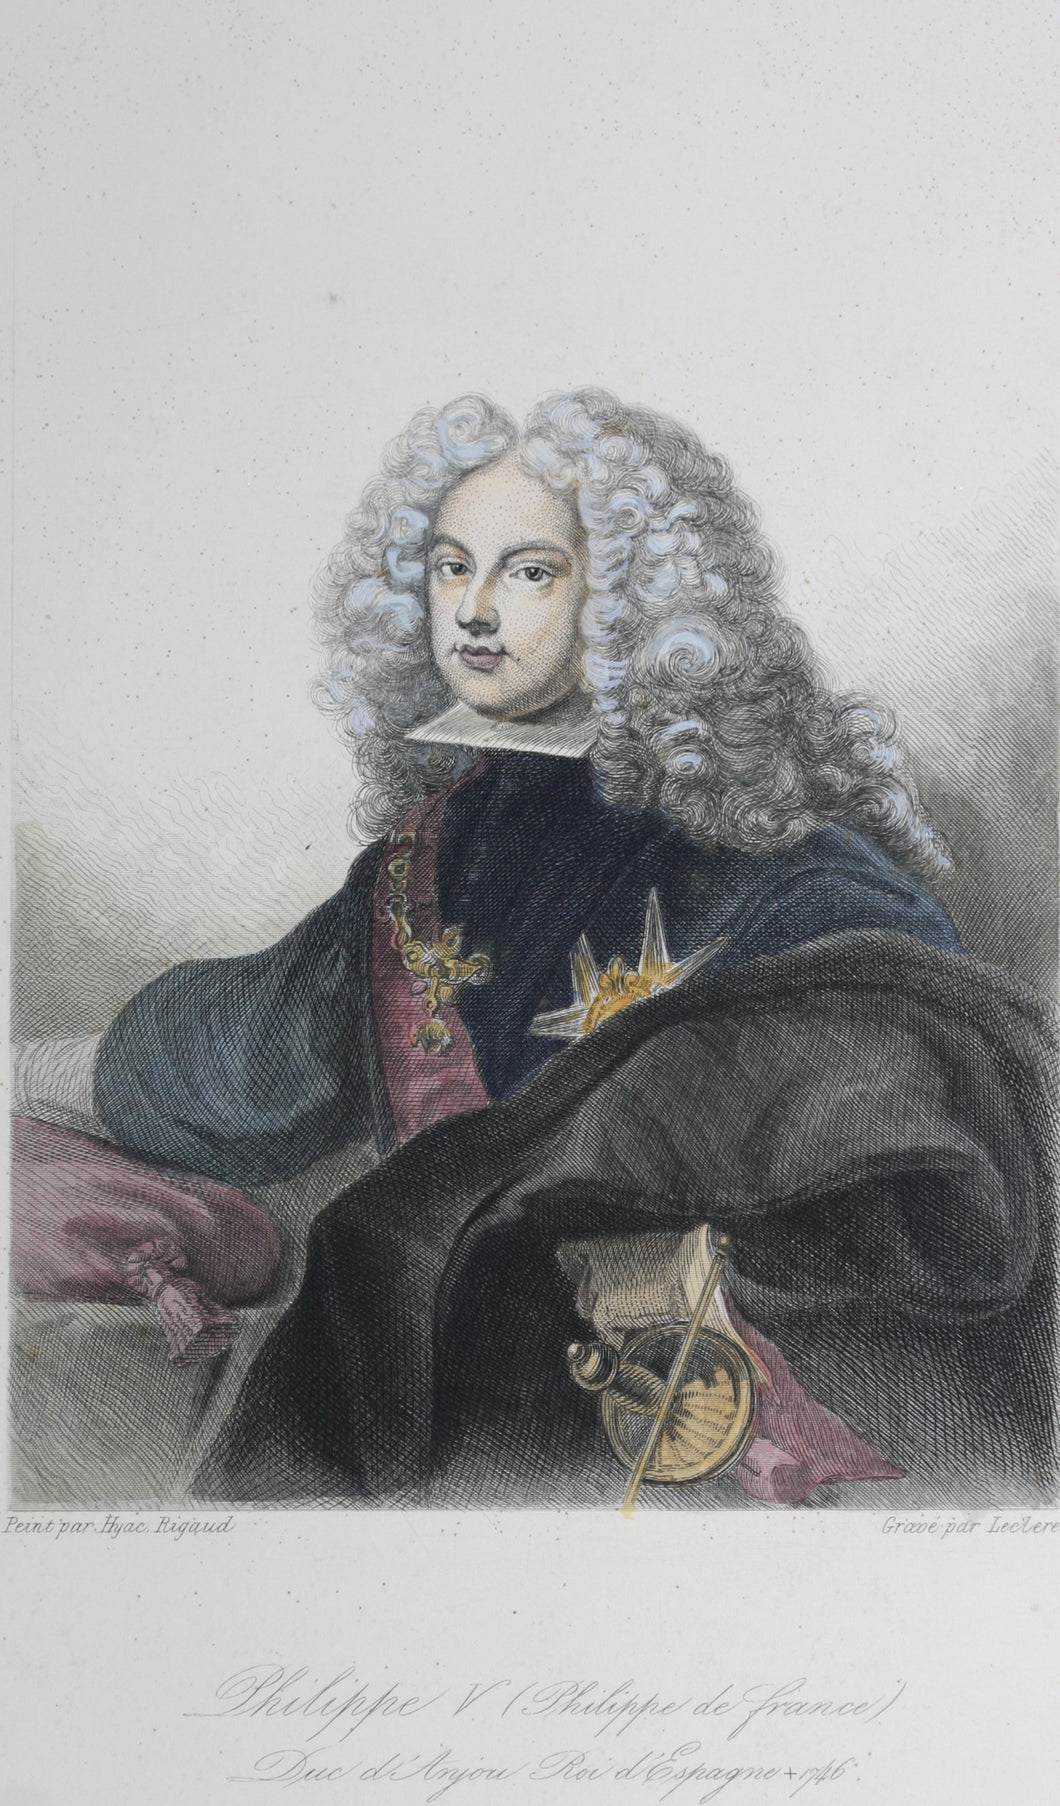 Hyacinthe Rigaud, after. Portrait of Philip V of Spain. Chalcographie du Louvre. Hand colored engraving by Leclère. 1830s.